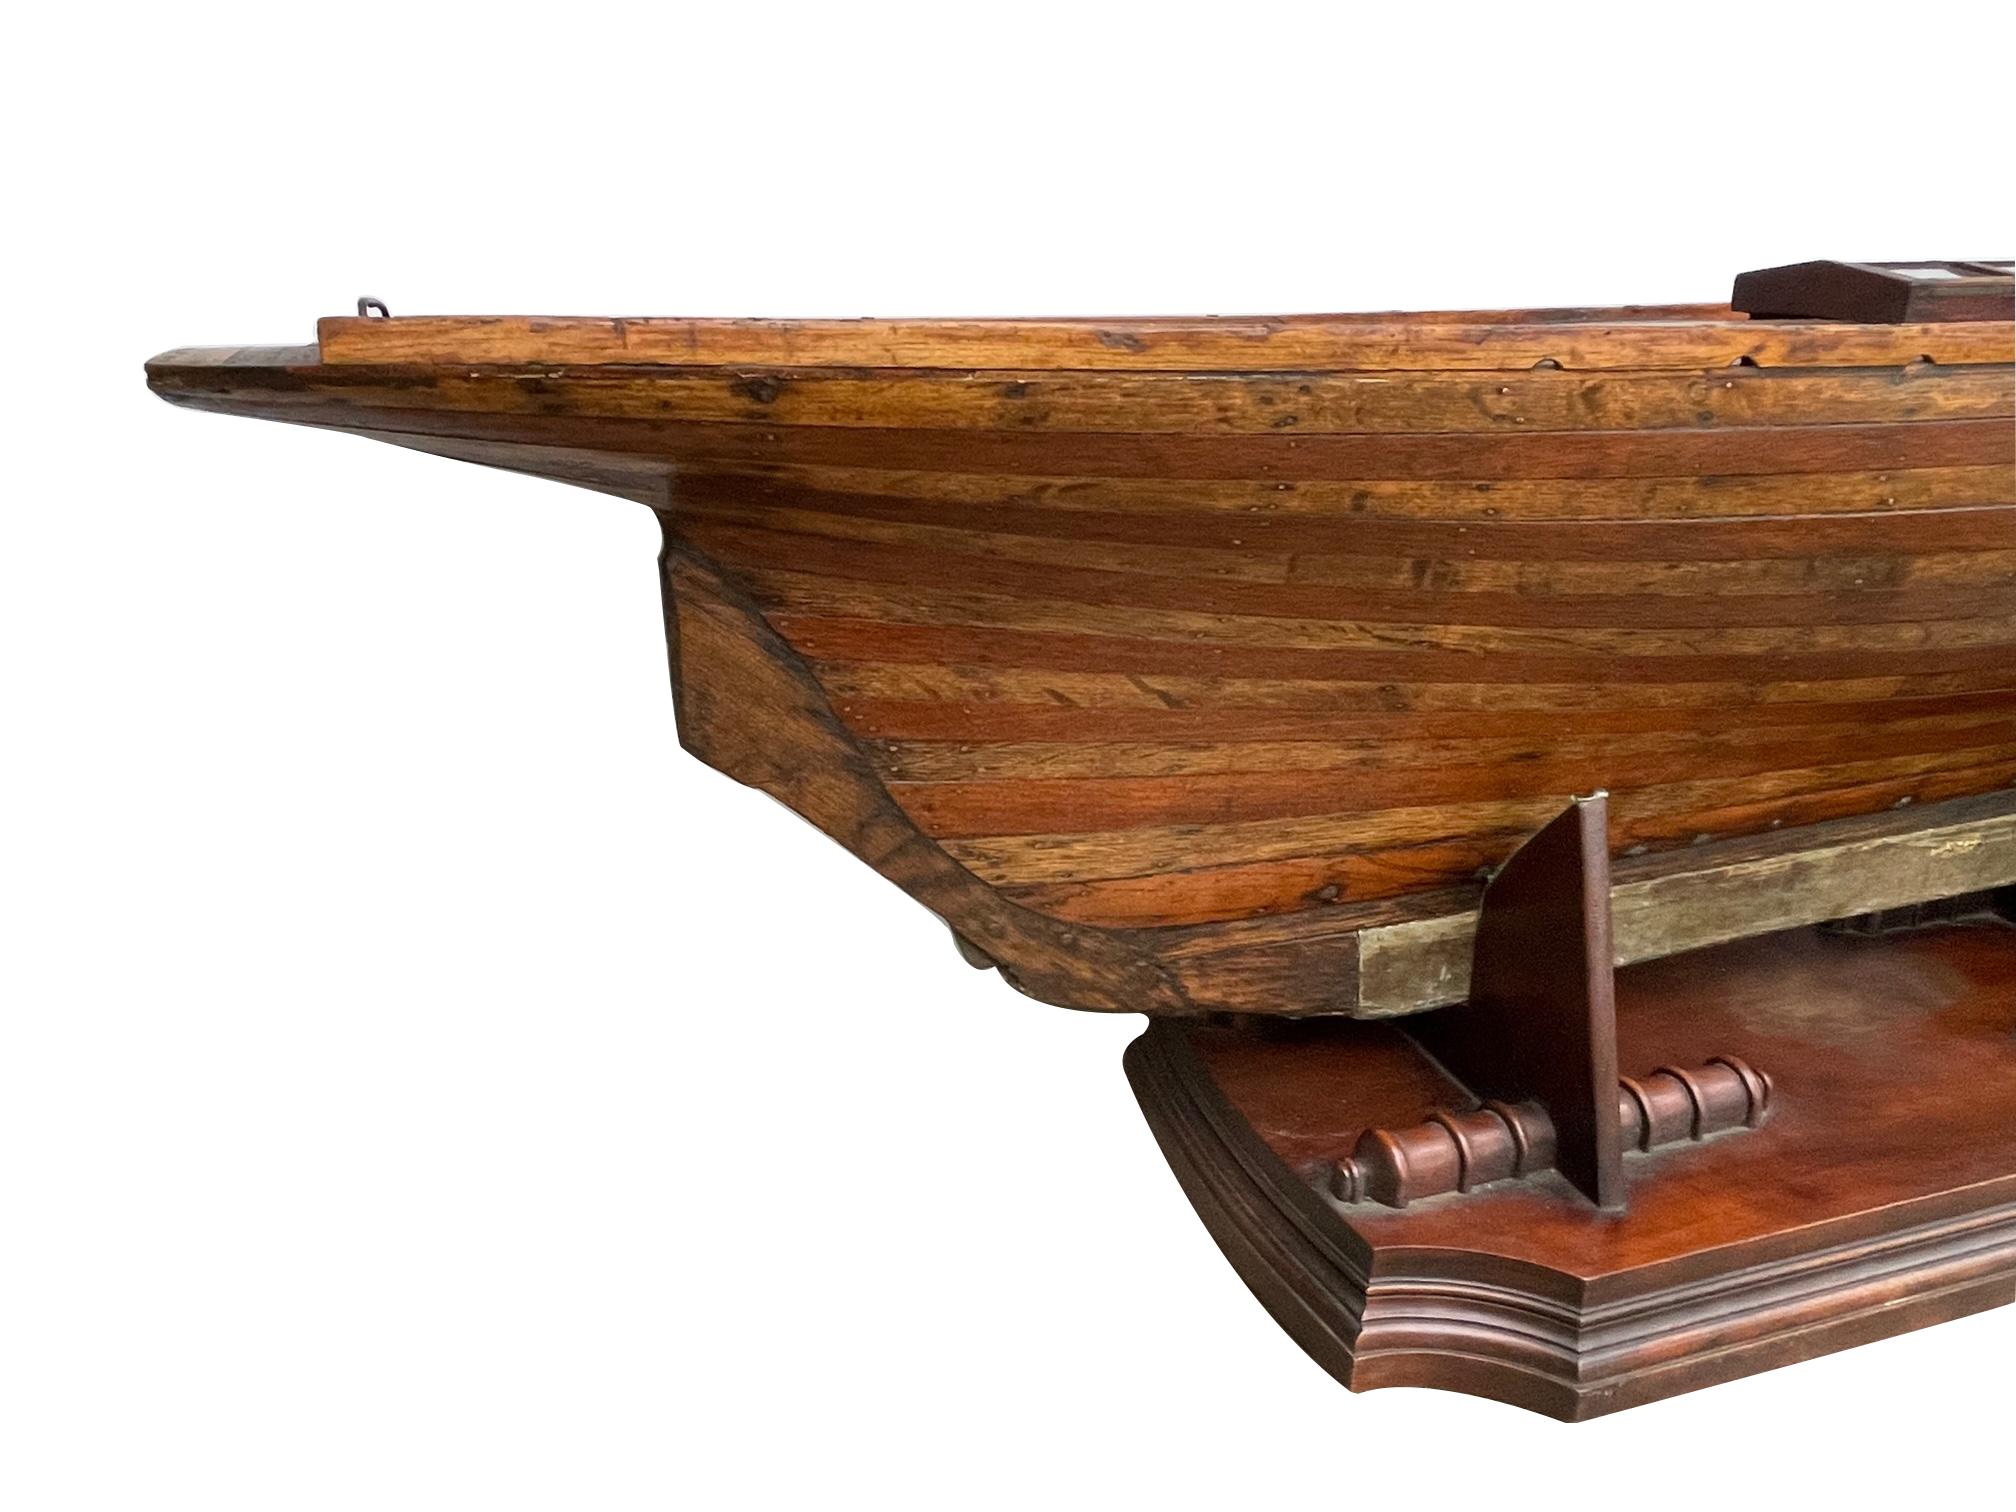 North American Large Late 19th Century Ship Model or Pond Yacht Hull For Sale